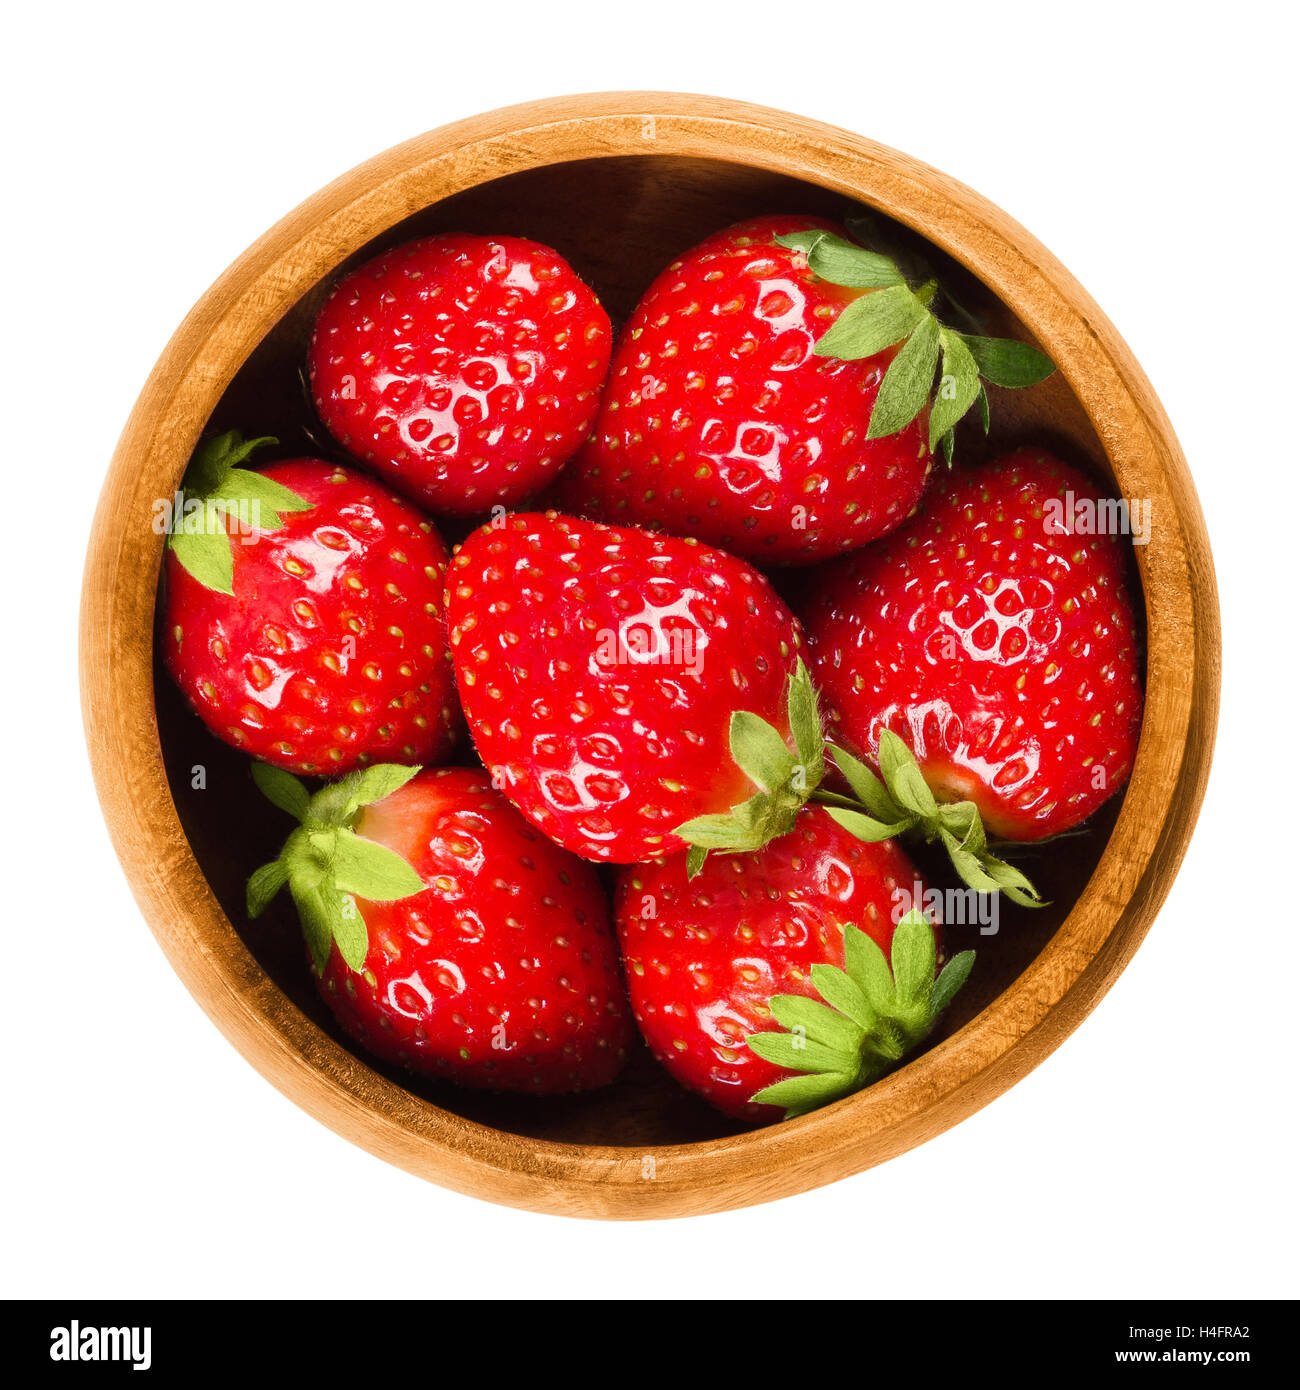 Garden Strawberries in a wooden bowl on white background. Fresh ripe bright red fruits of Fragaria ananassa. Stock Photo